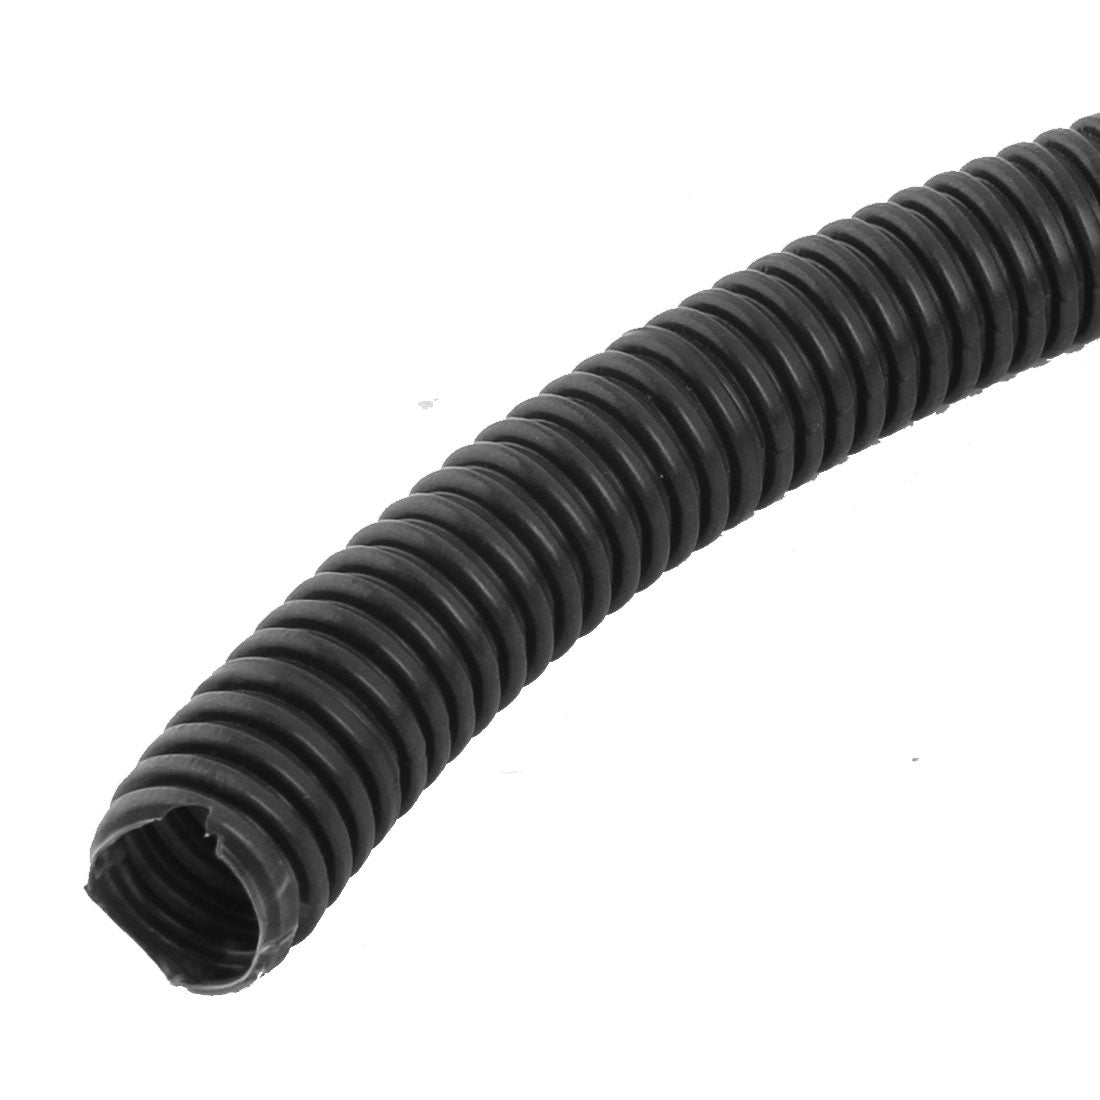 uxcell Uxcell 5 M 16 x 20 mm Plastic Split Corrugated Conduit Tube for Garden,Office Black